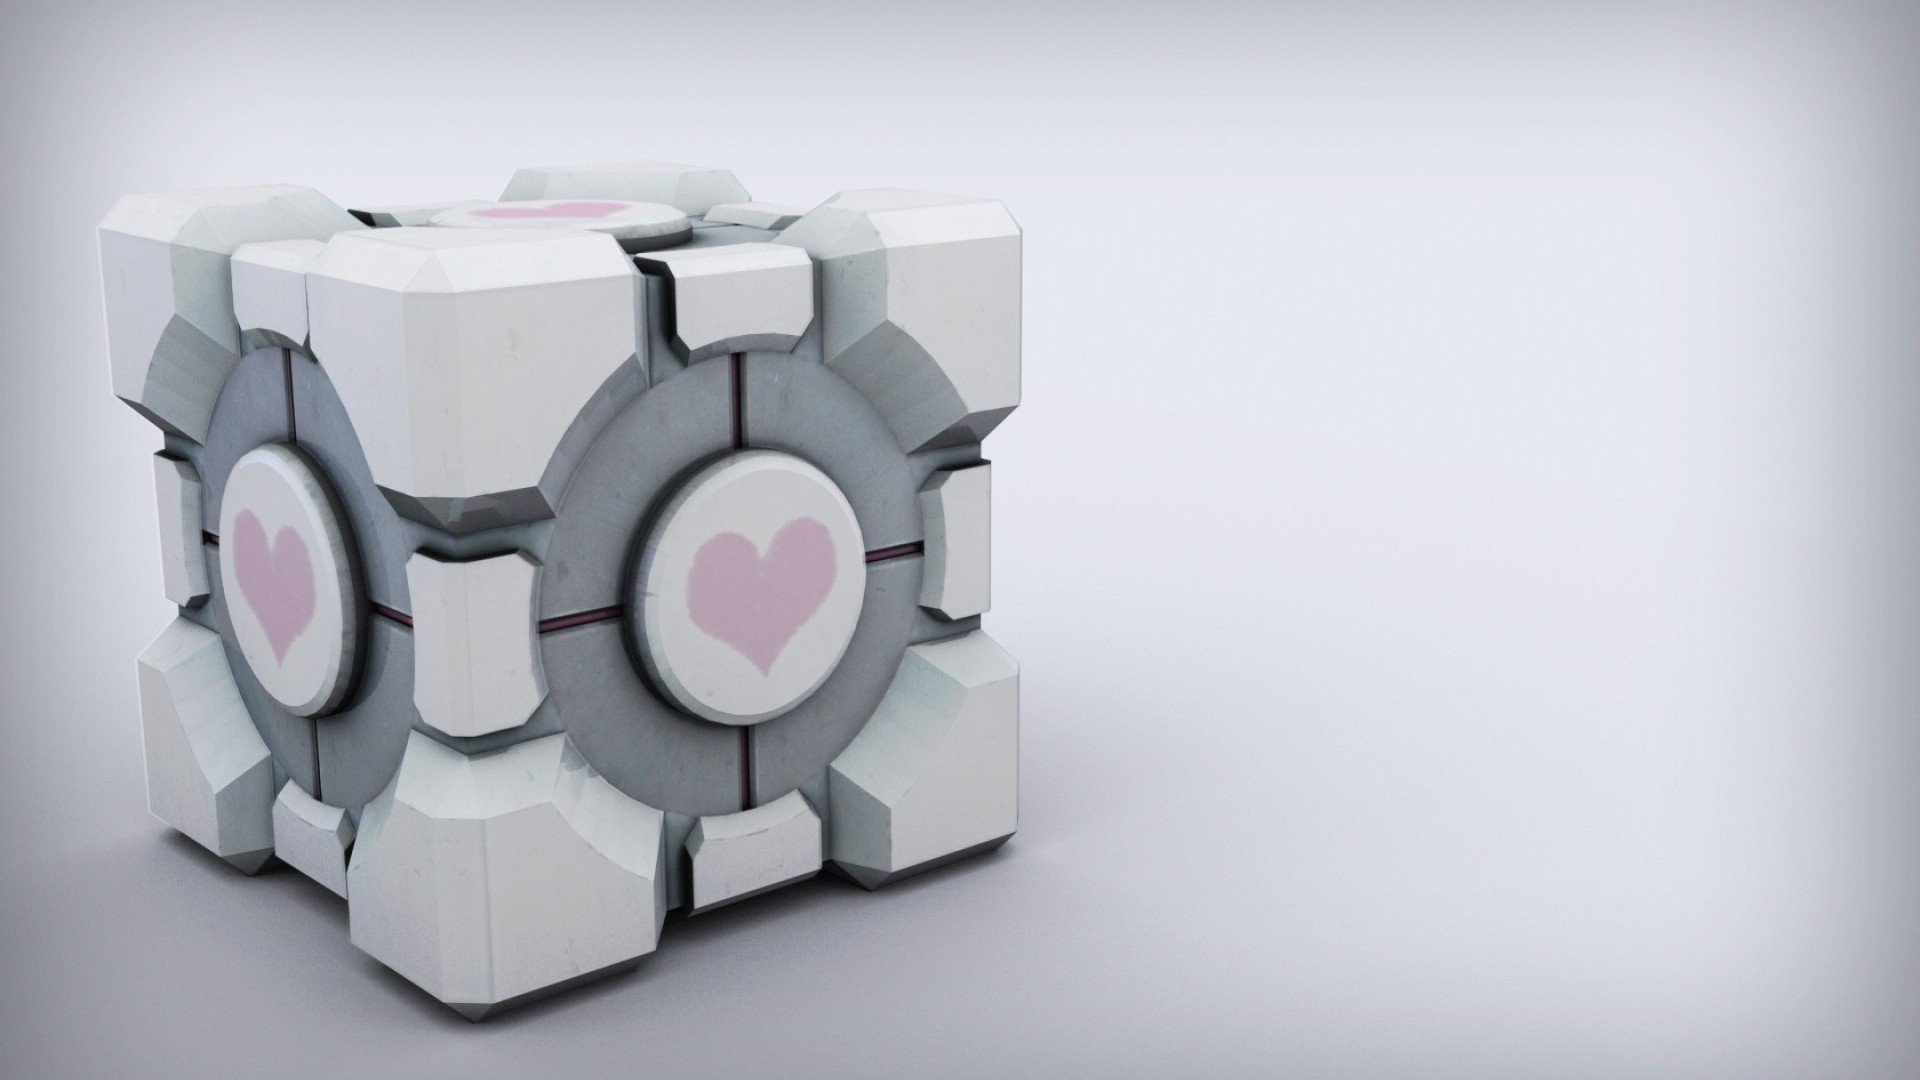 Download Weighted Companion Cube wallpaper